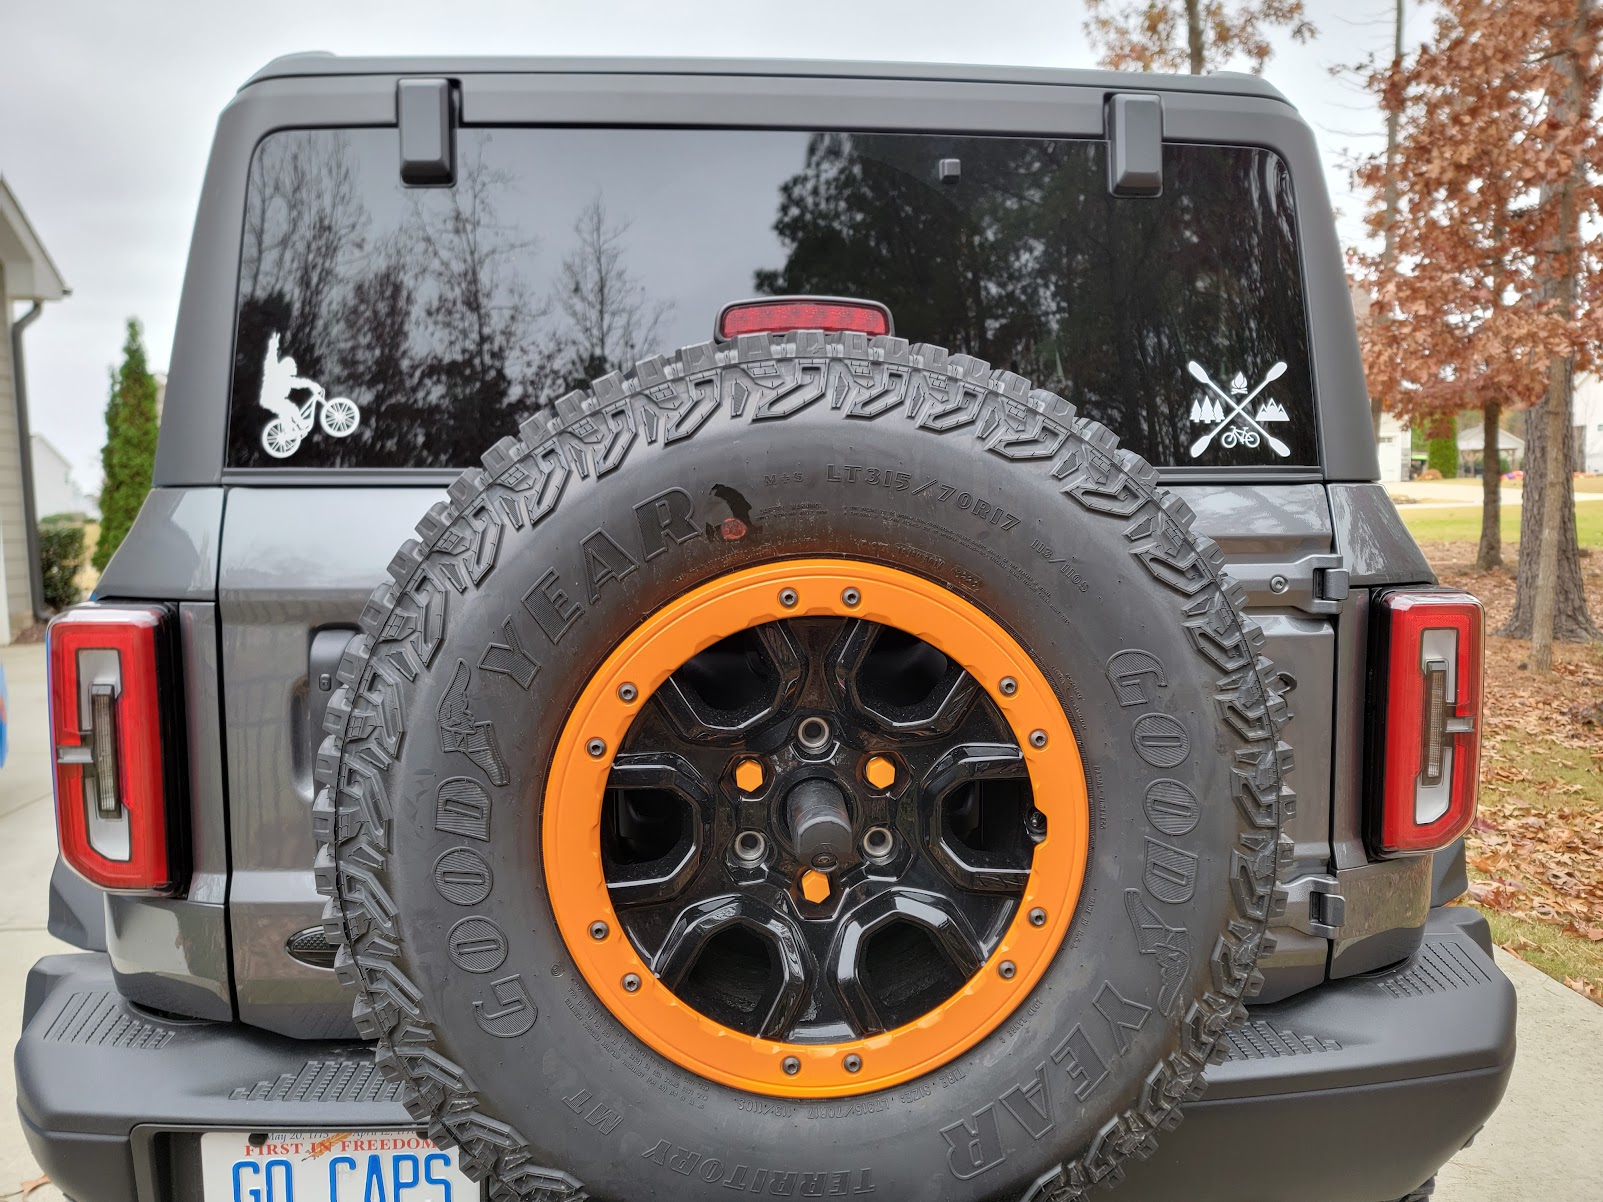 Ford Bronco Have you put Stickers on your Bronco? Let's see them Mod27 - Orange lug covers